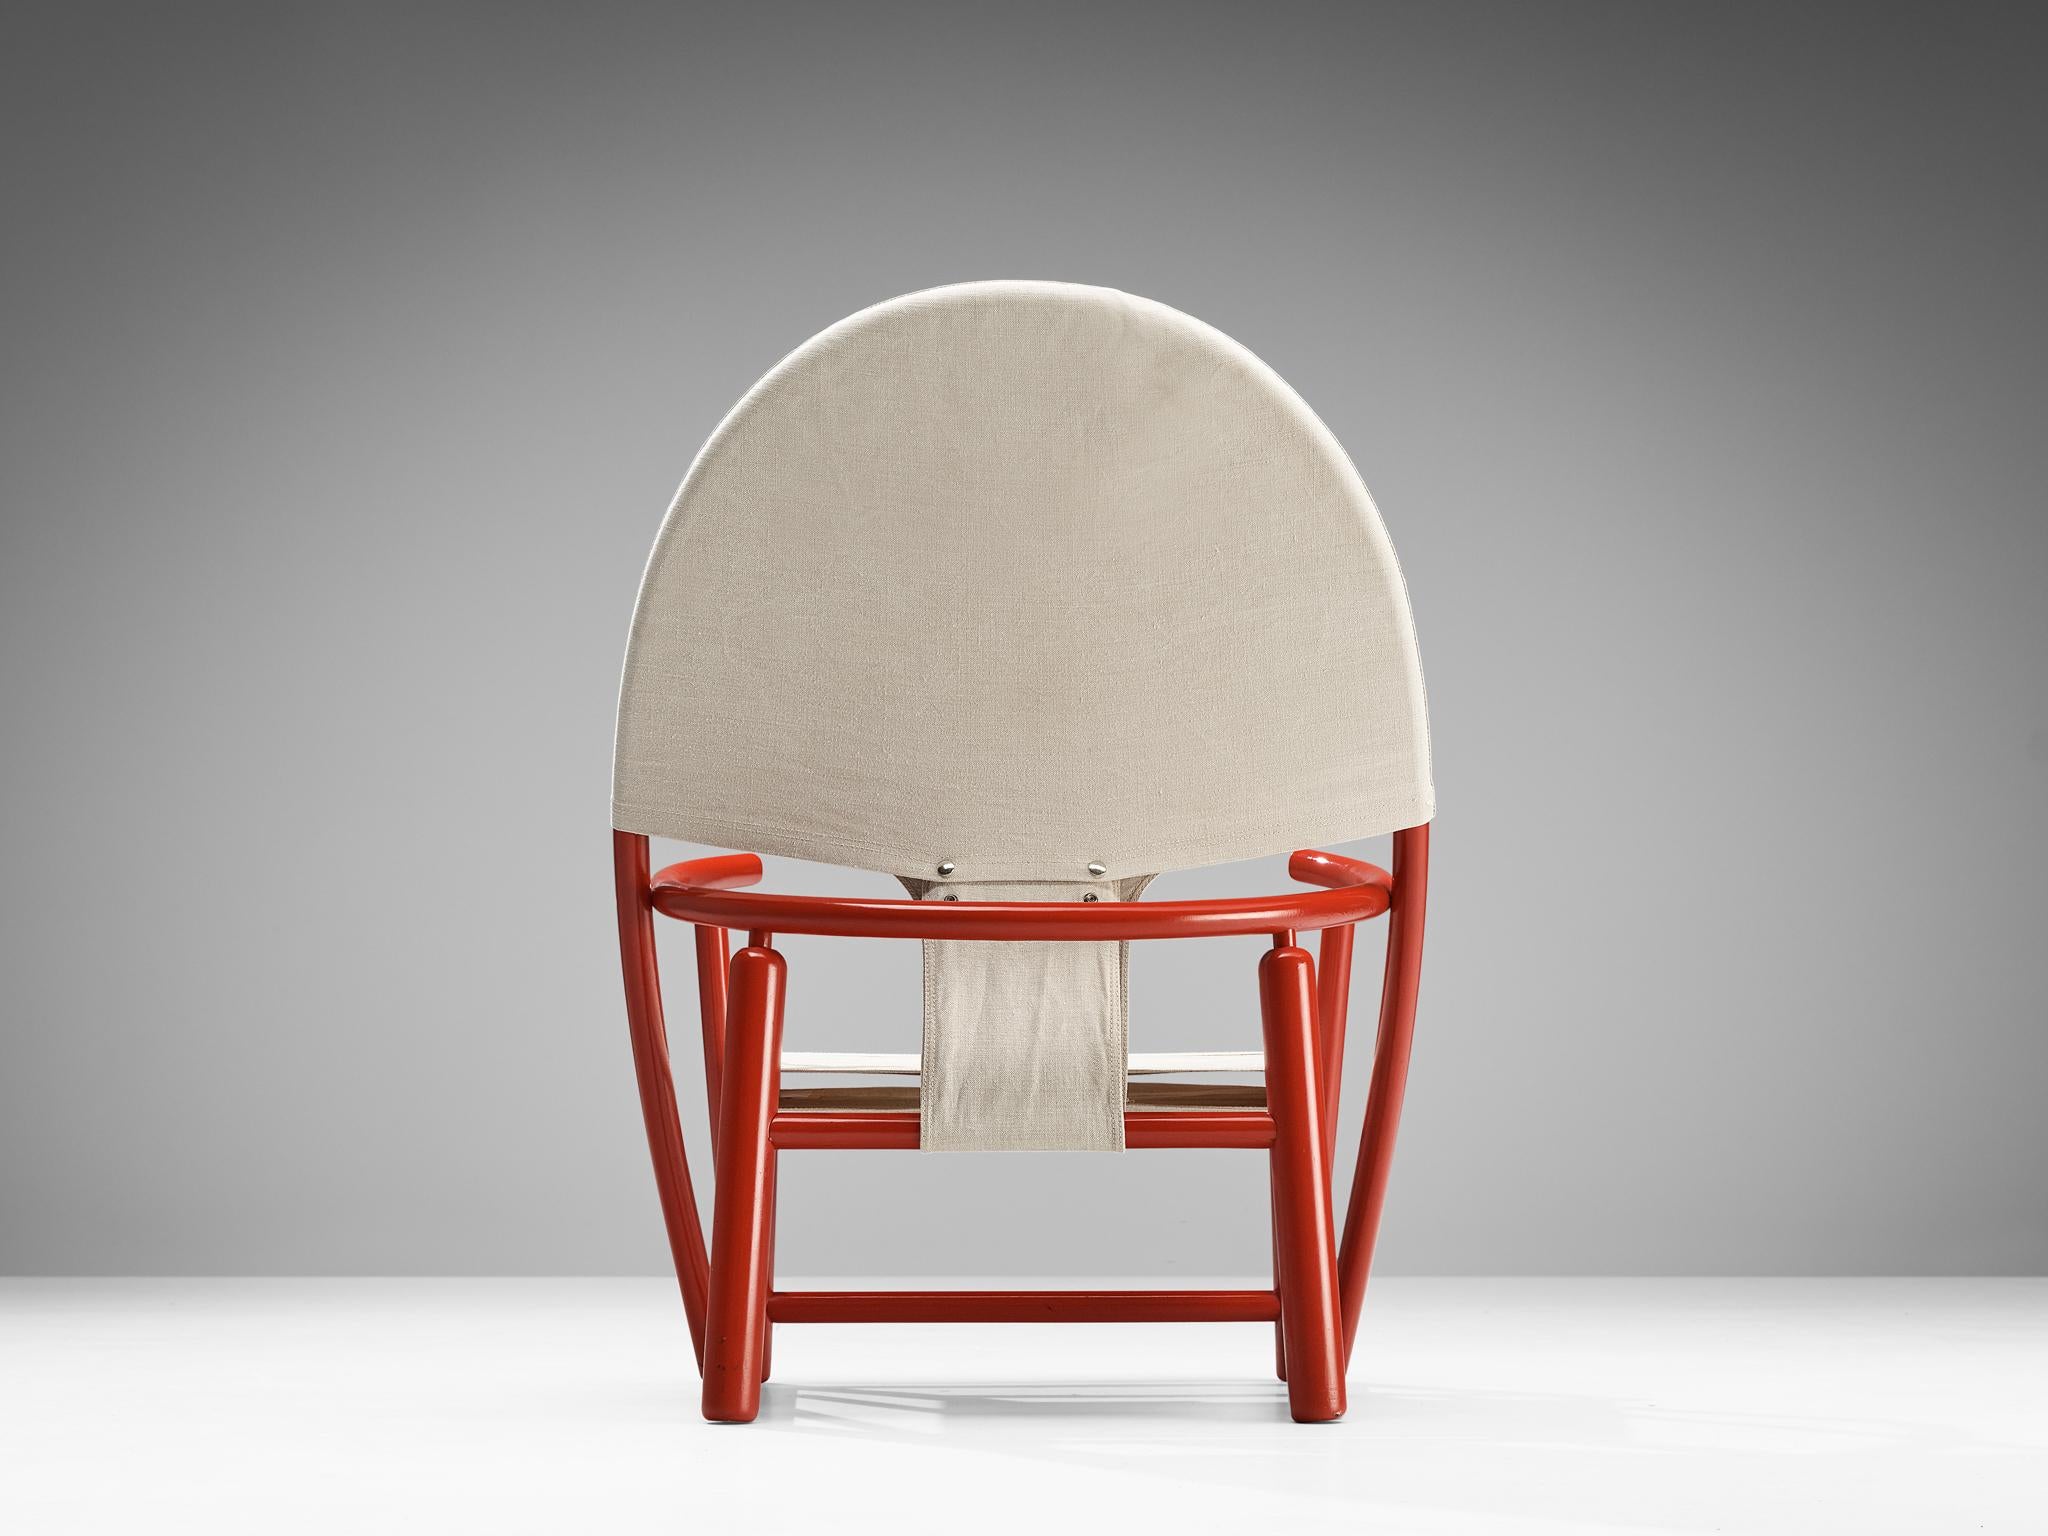 Werther Toffoloni & Piero Palange Pair of ‘Hoop’ Red Chairs in Canvas  For Sale 1